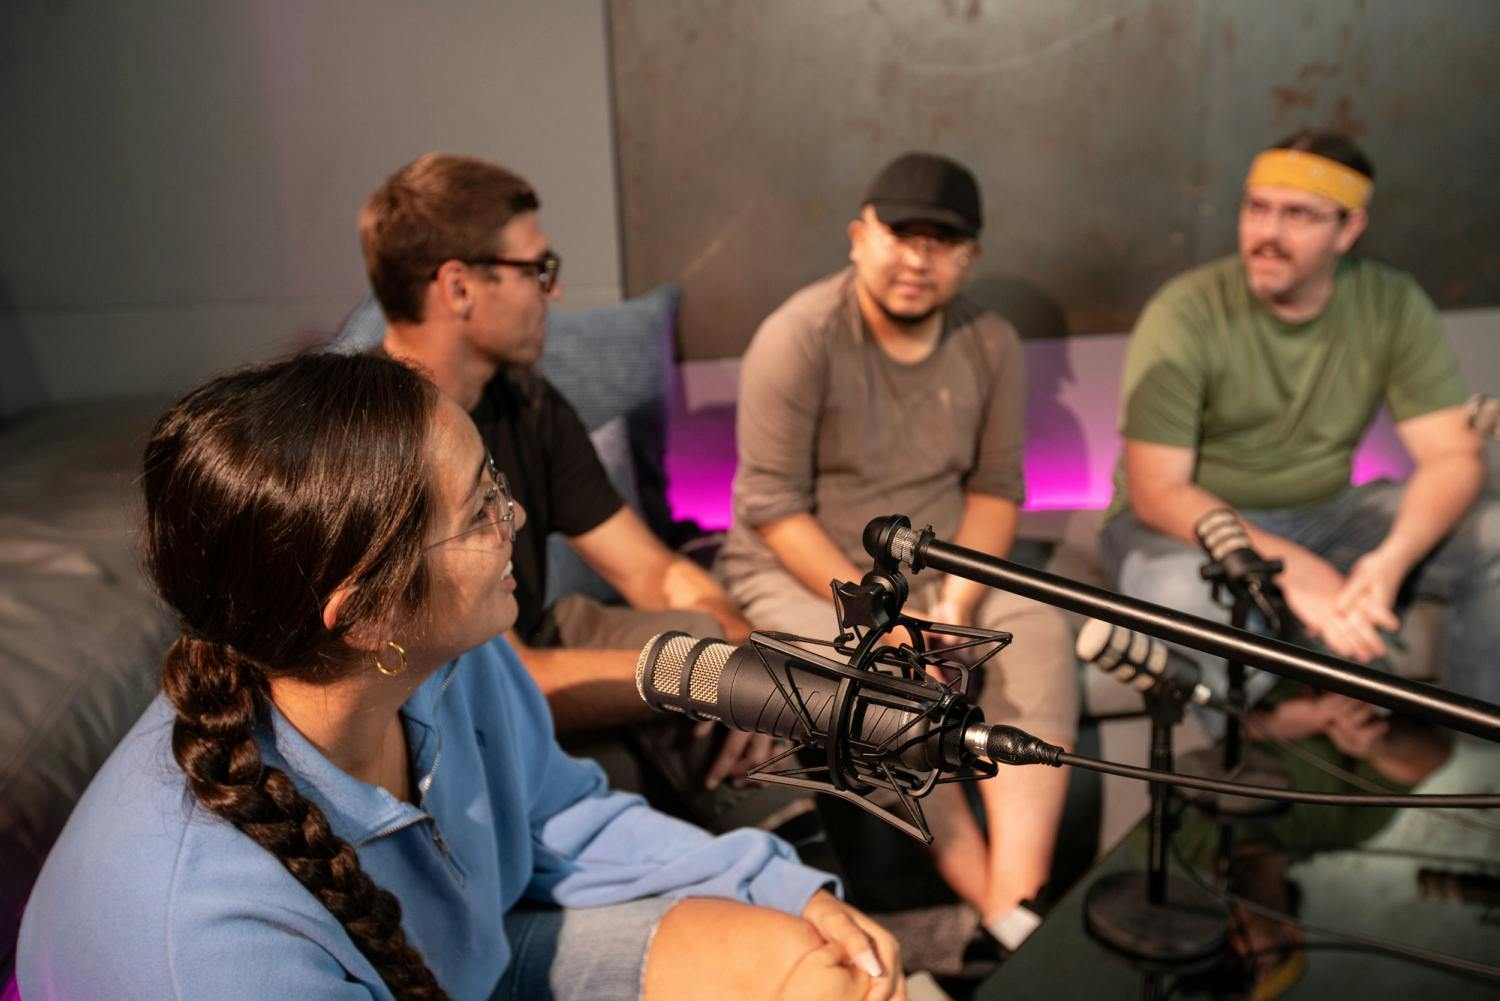 A close-up perspective of a panel discussion, featuring the participants in mid-conversation with podcasting microphones.